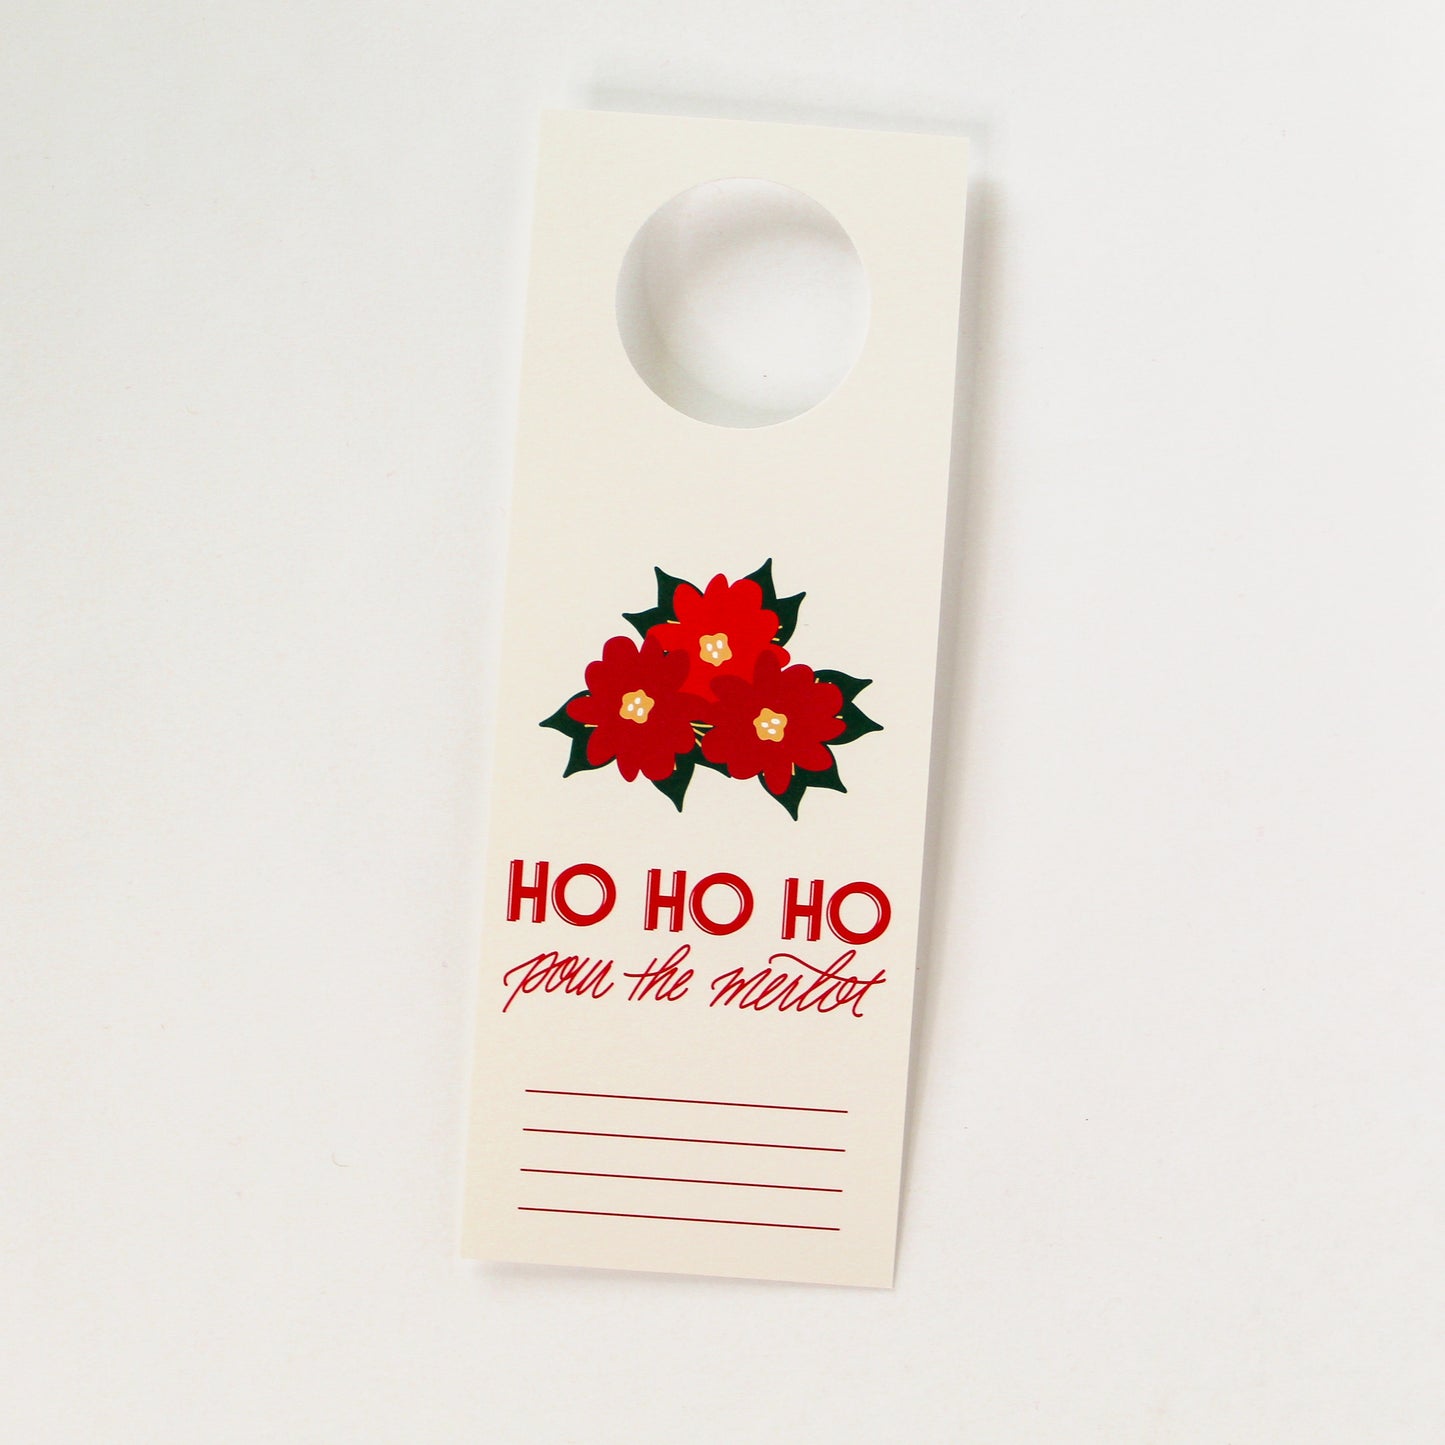 "Ho Ho Ho Pour The Merlot"  Holiday Bottle Neck Gift Tags. These tags come complete with pre-cut ribbons, simplifying your gift presentation. Just slide the tag onto the bottle neck, tie the ribbon into a beautiful bow,